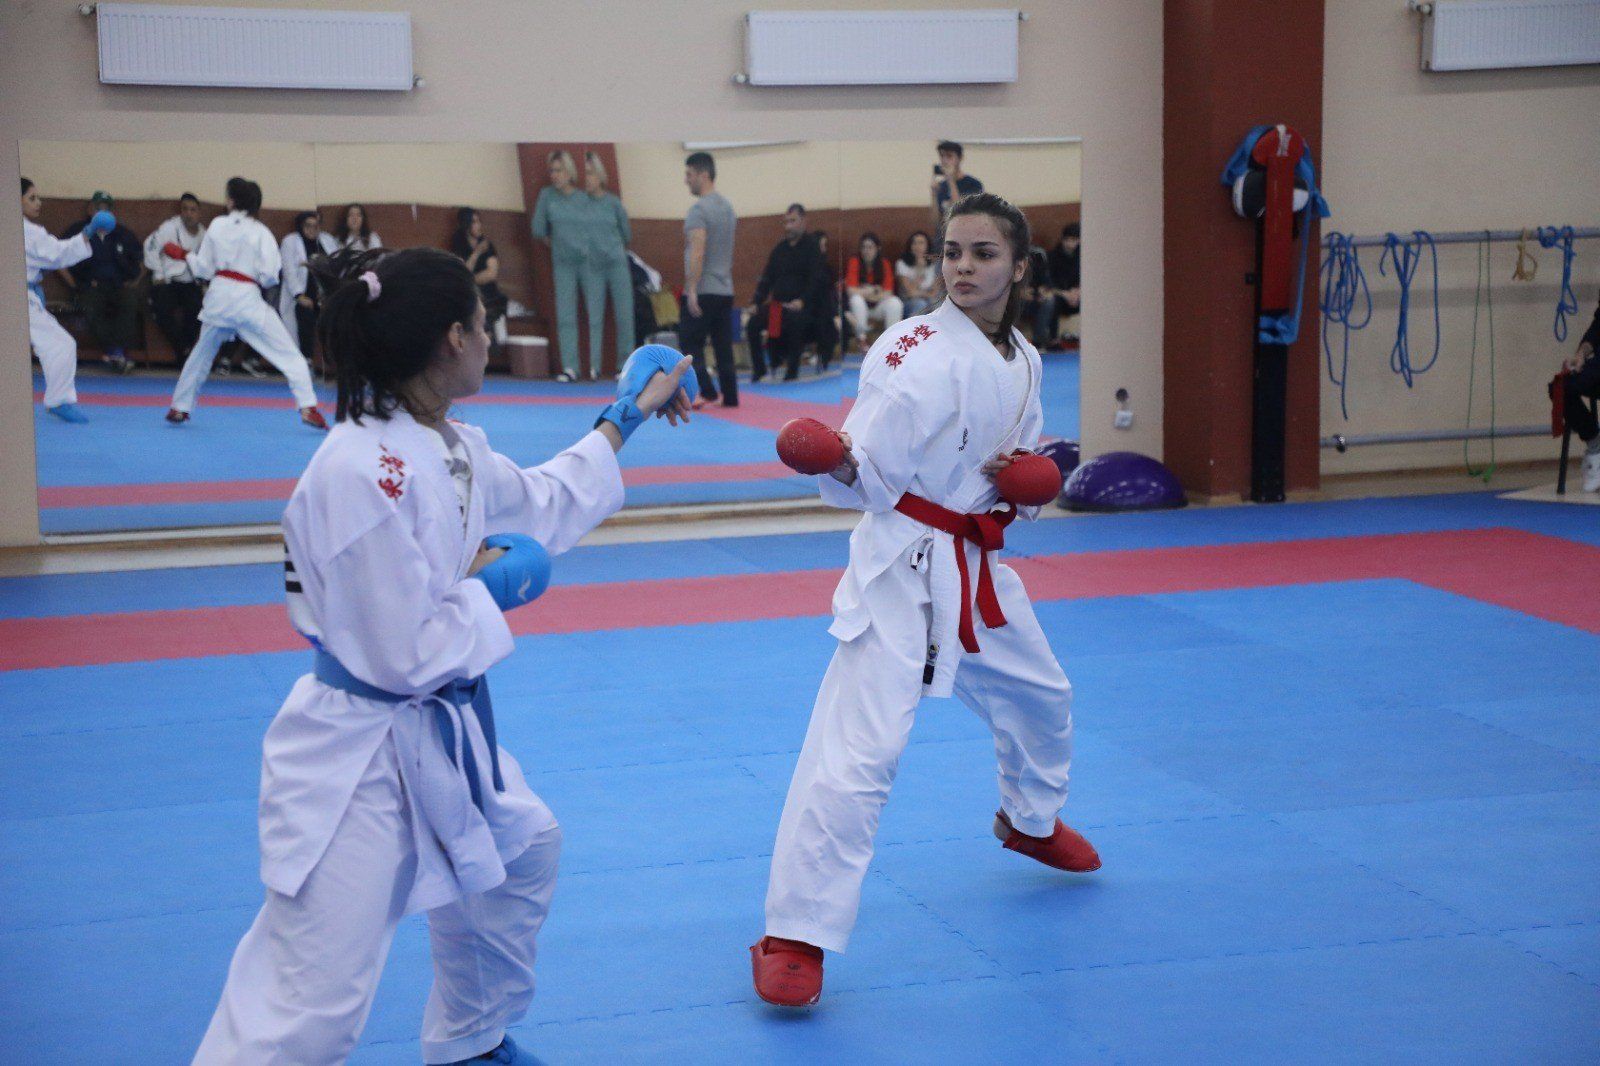 Our karate players who will go to the European Championship confirmed